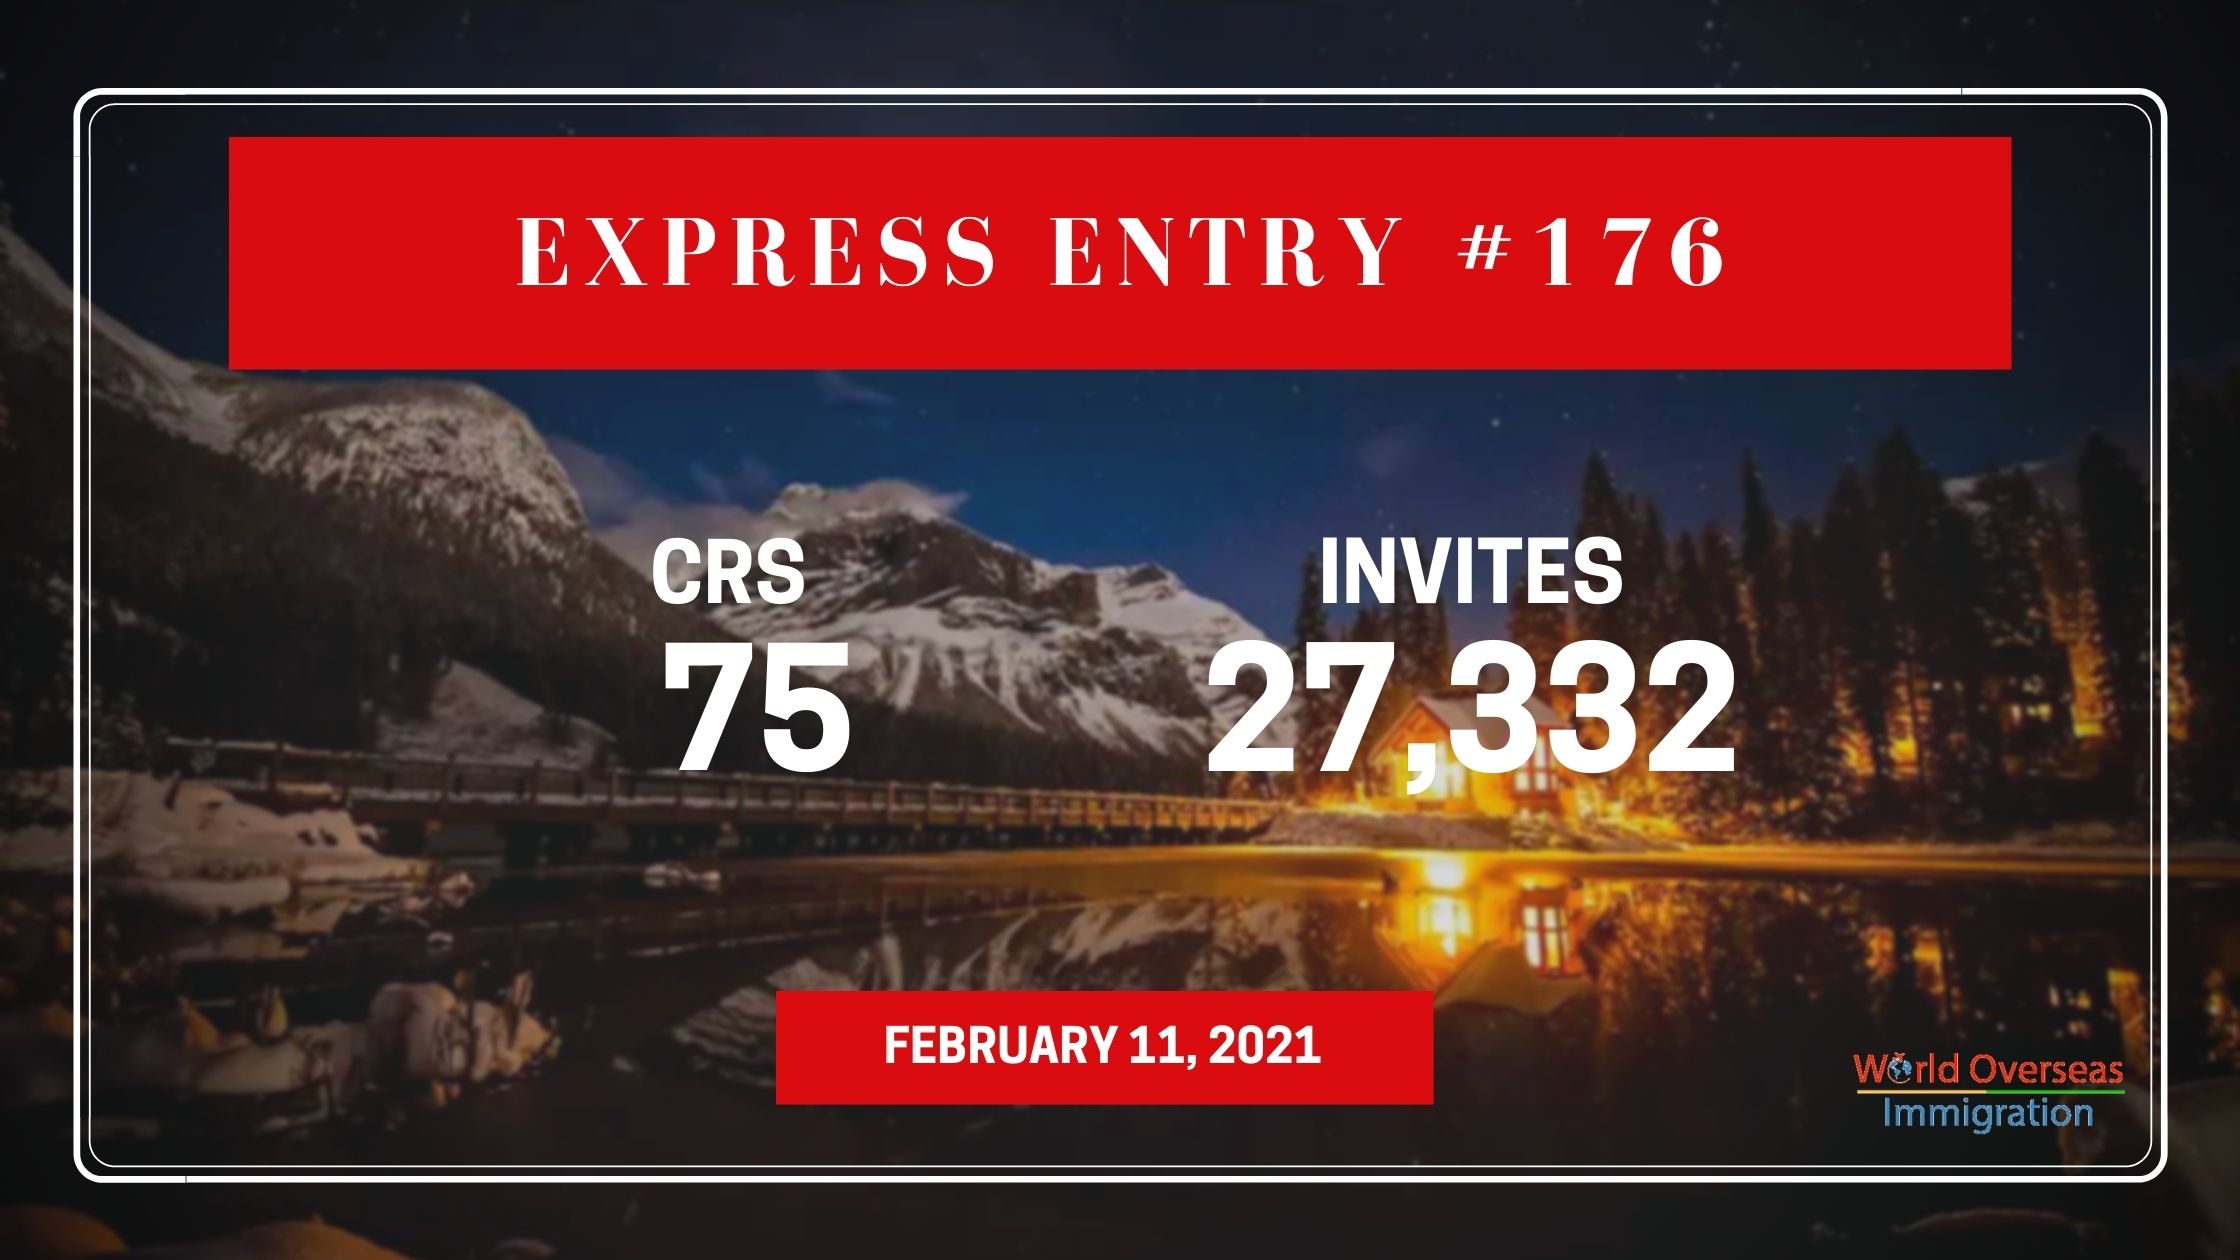 Express Entry #176: 27,332 ITAs are issued in the new draw